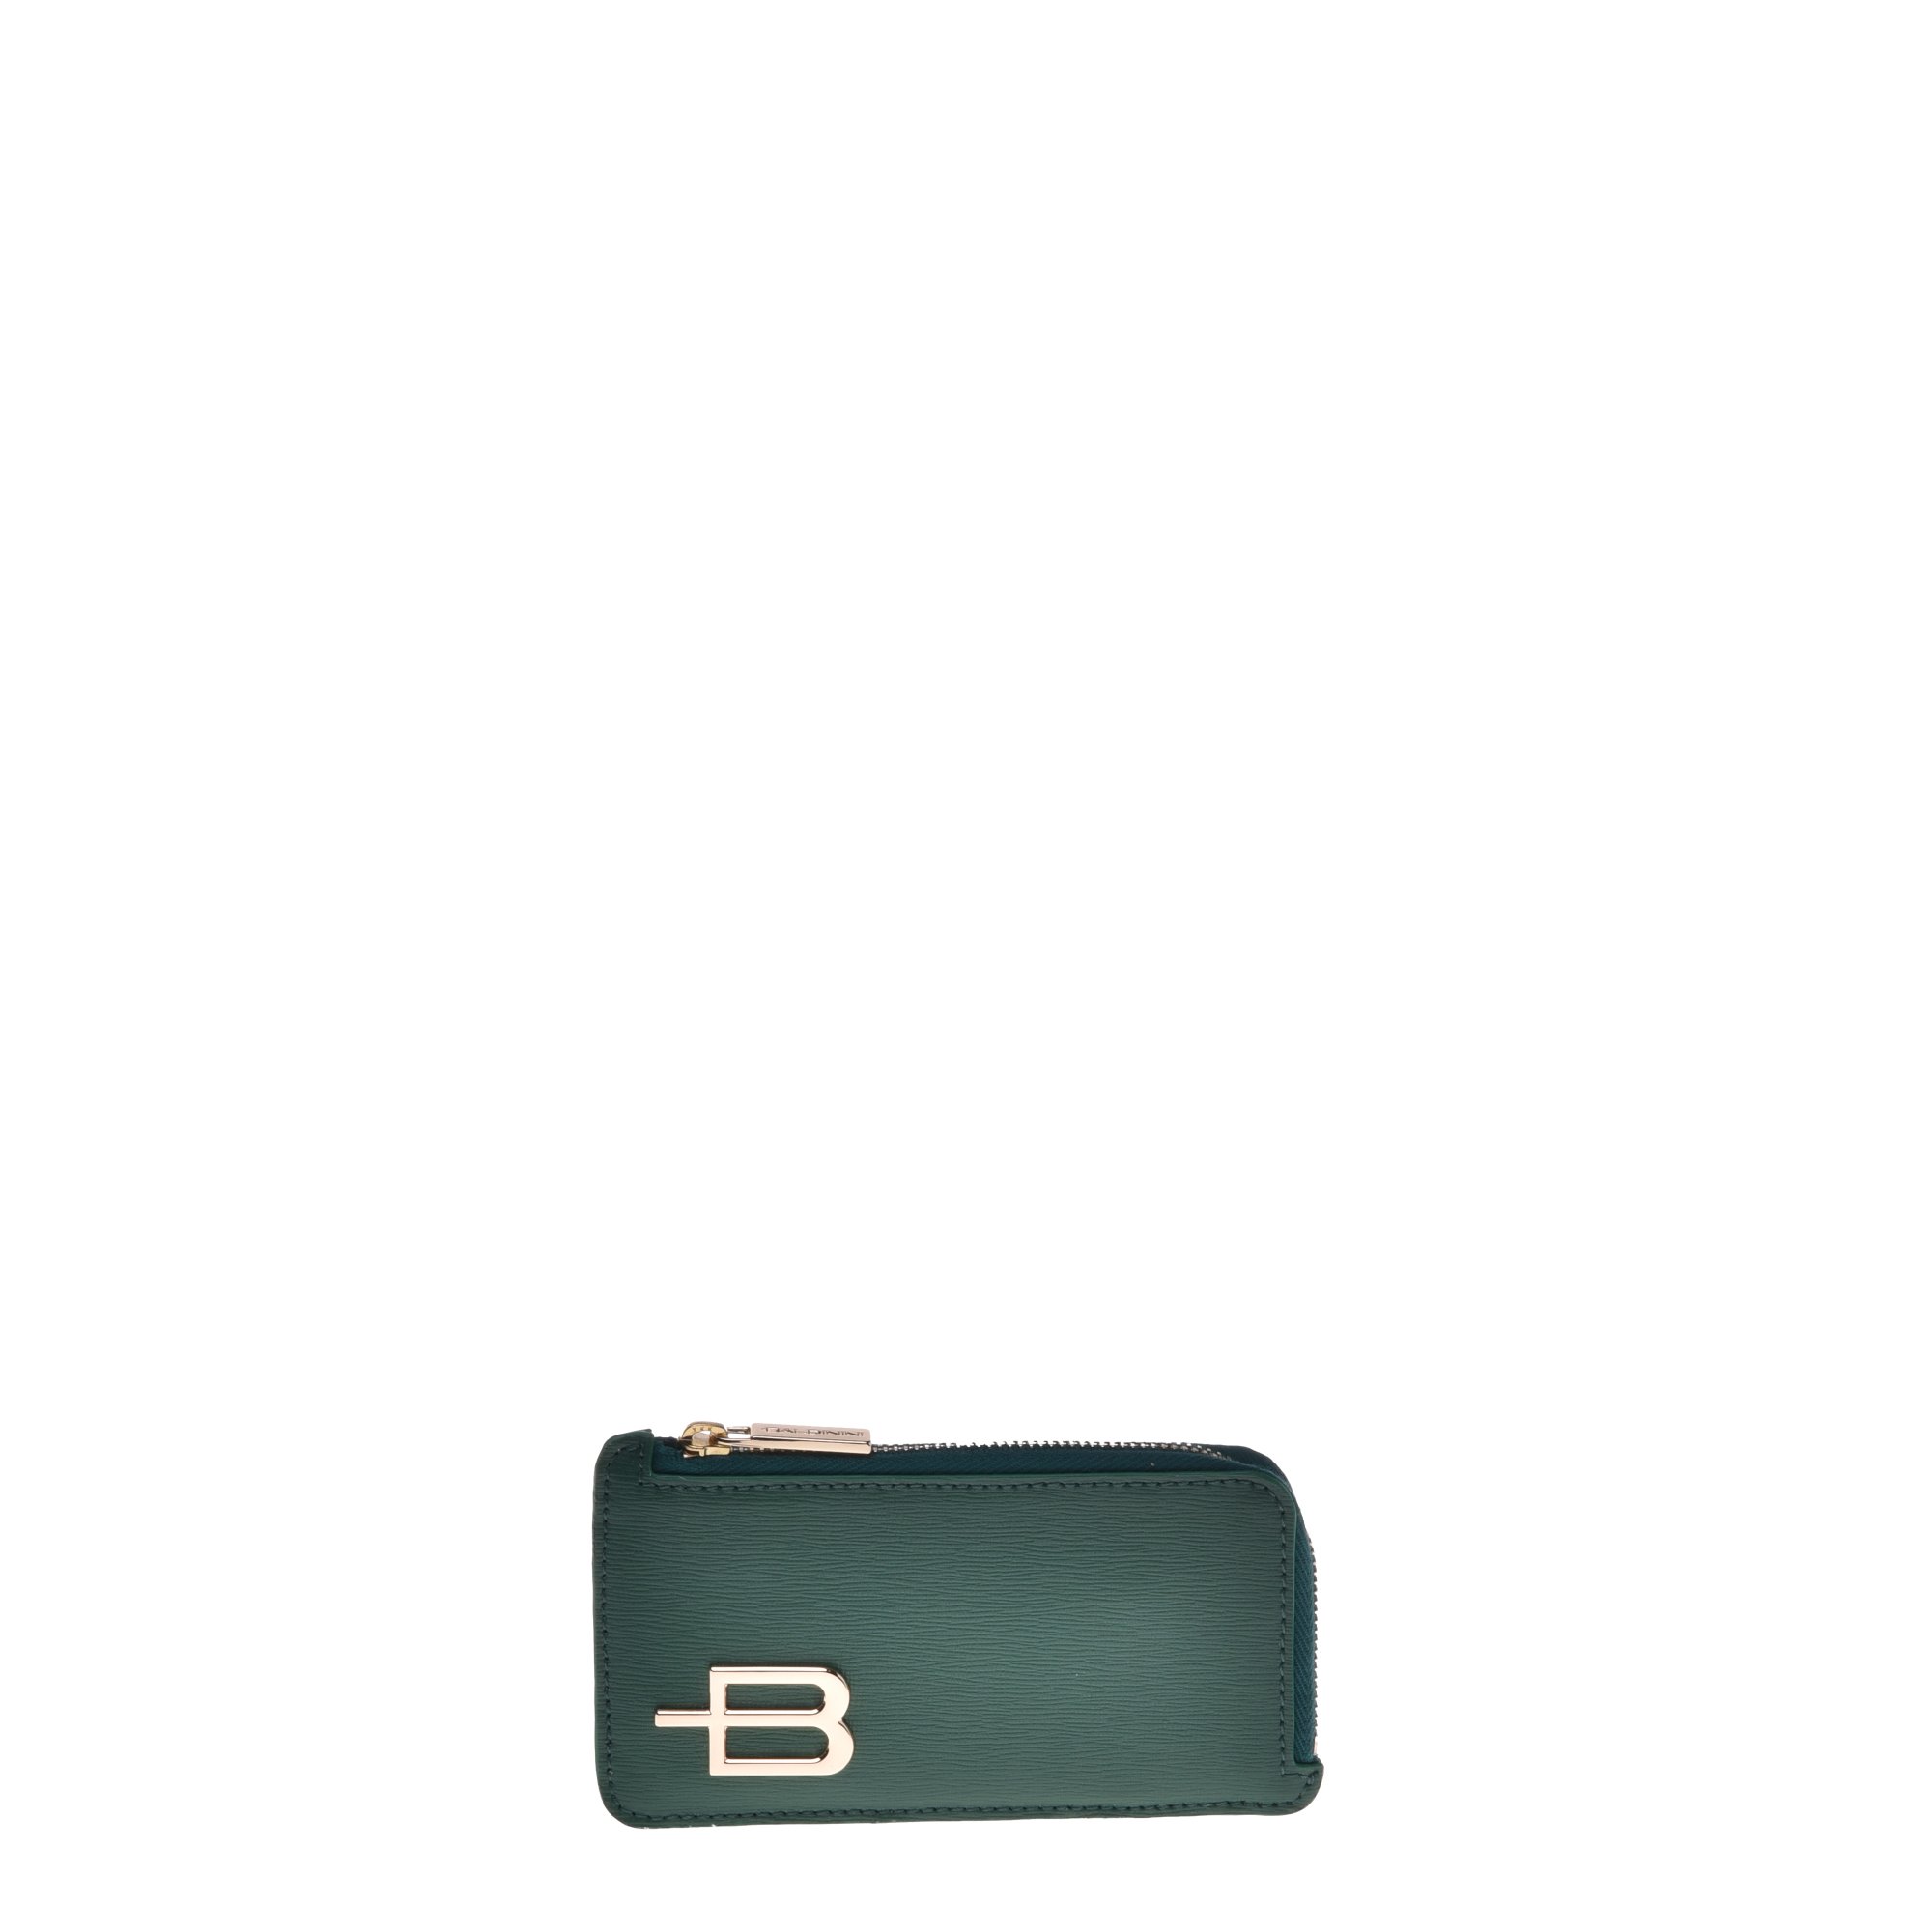 Wallet in green saffiano image